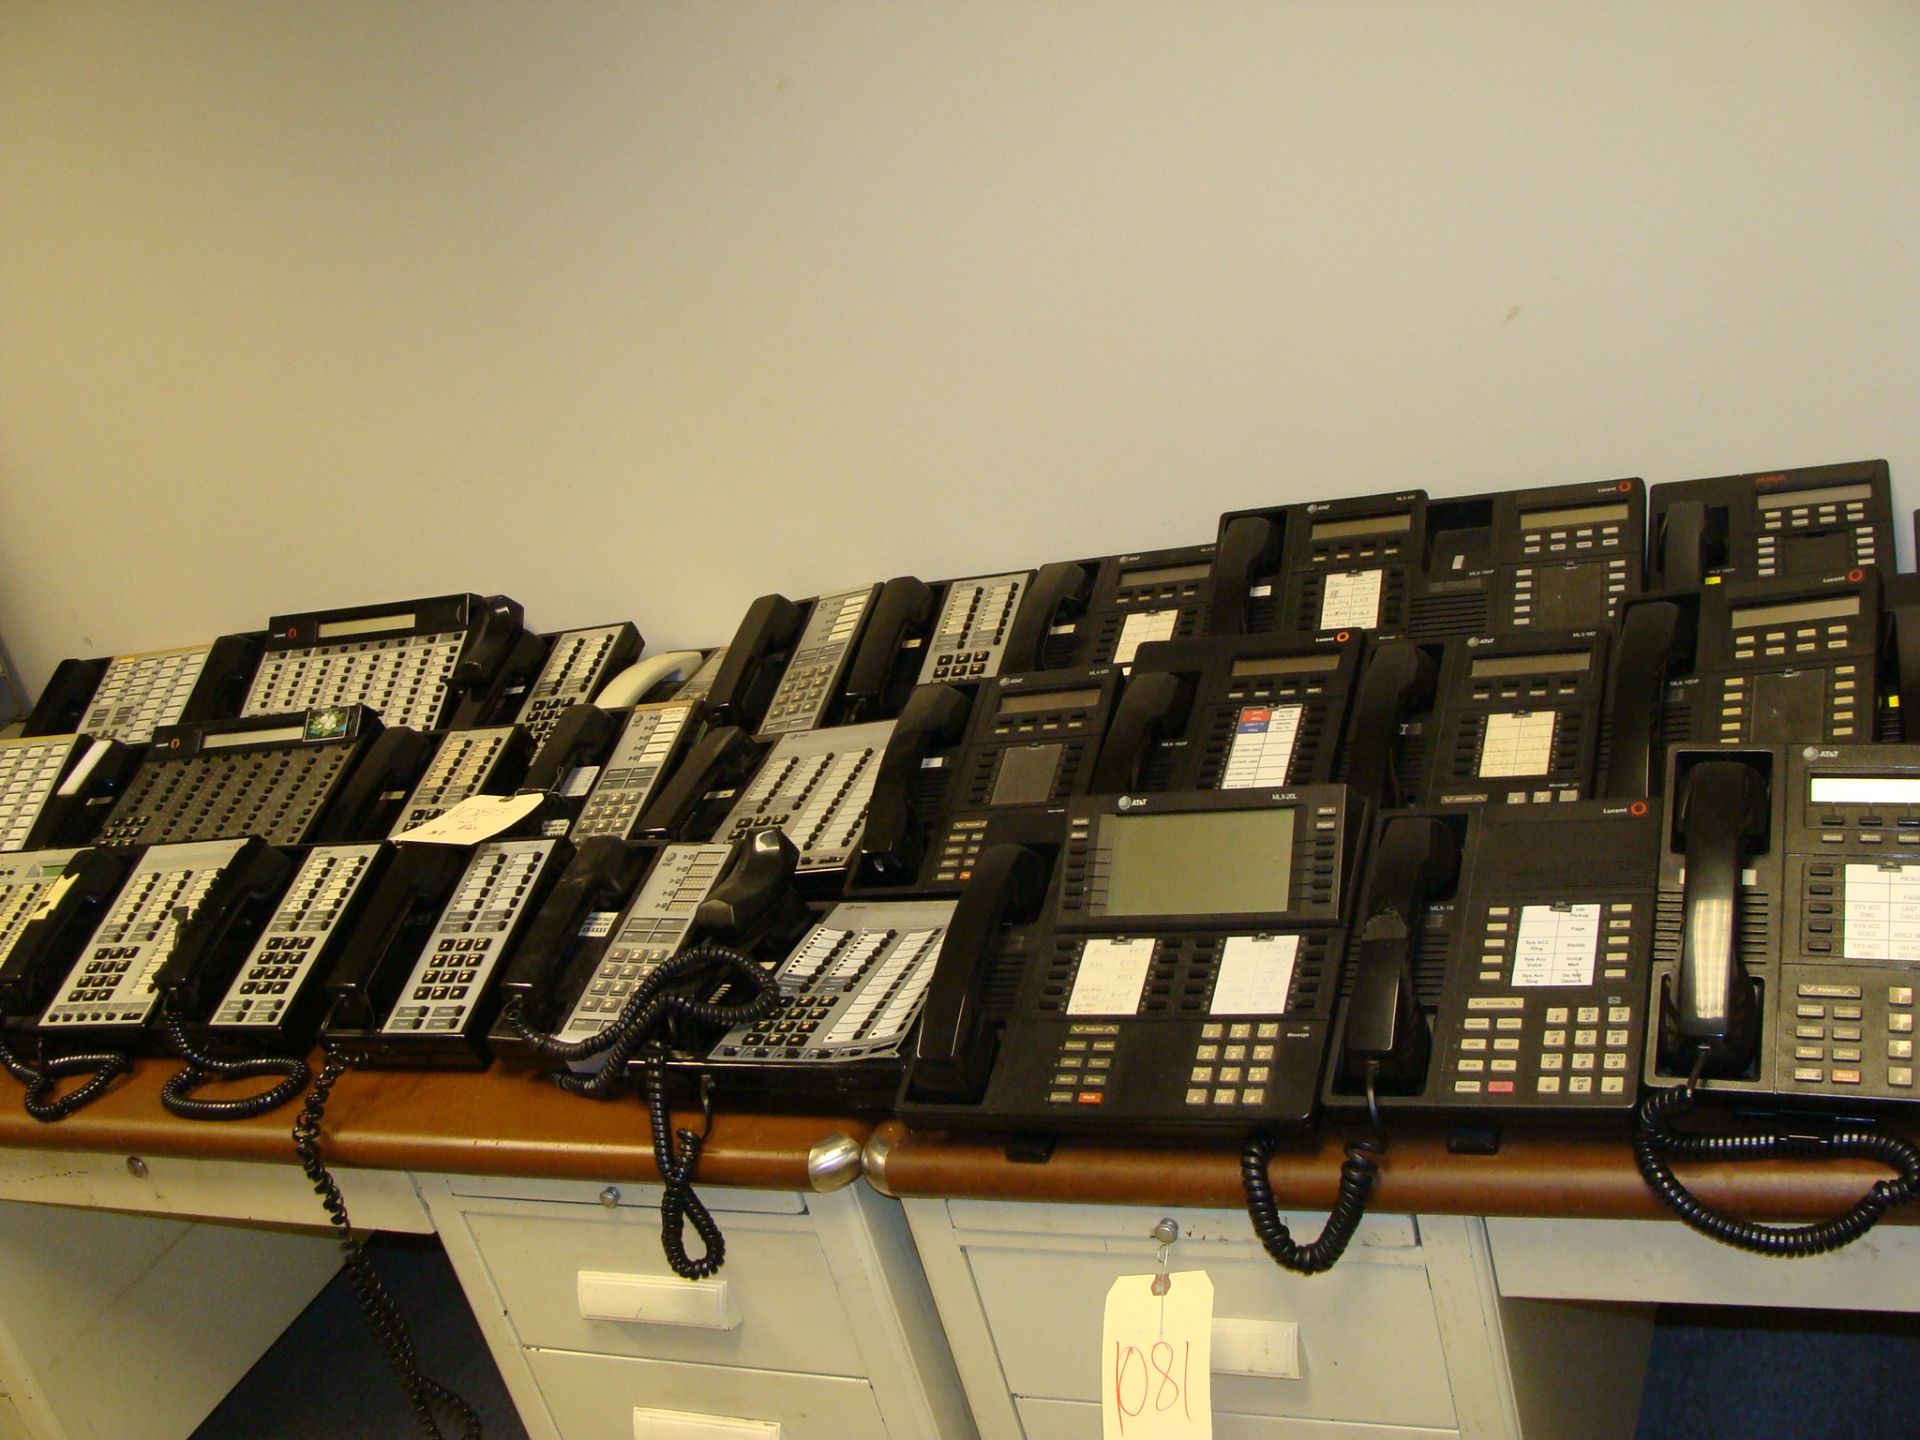 31 AT&T Handsets with Merlin controller